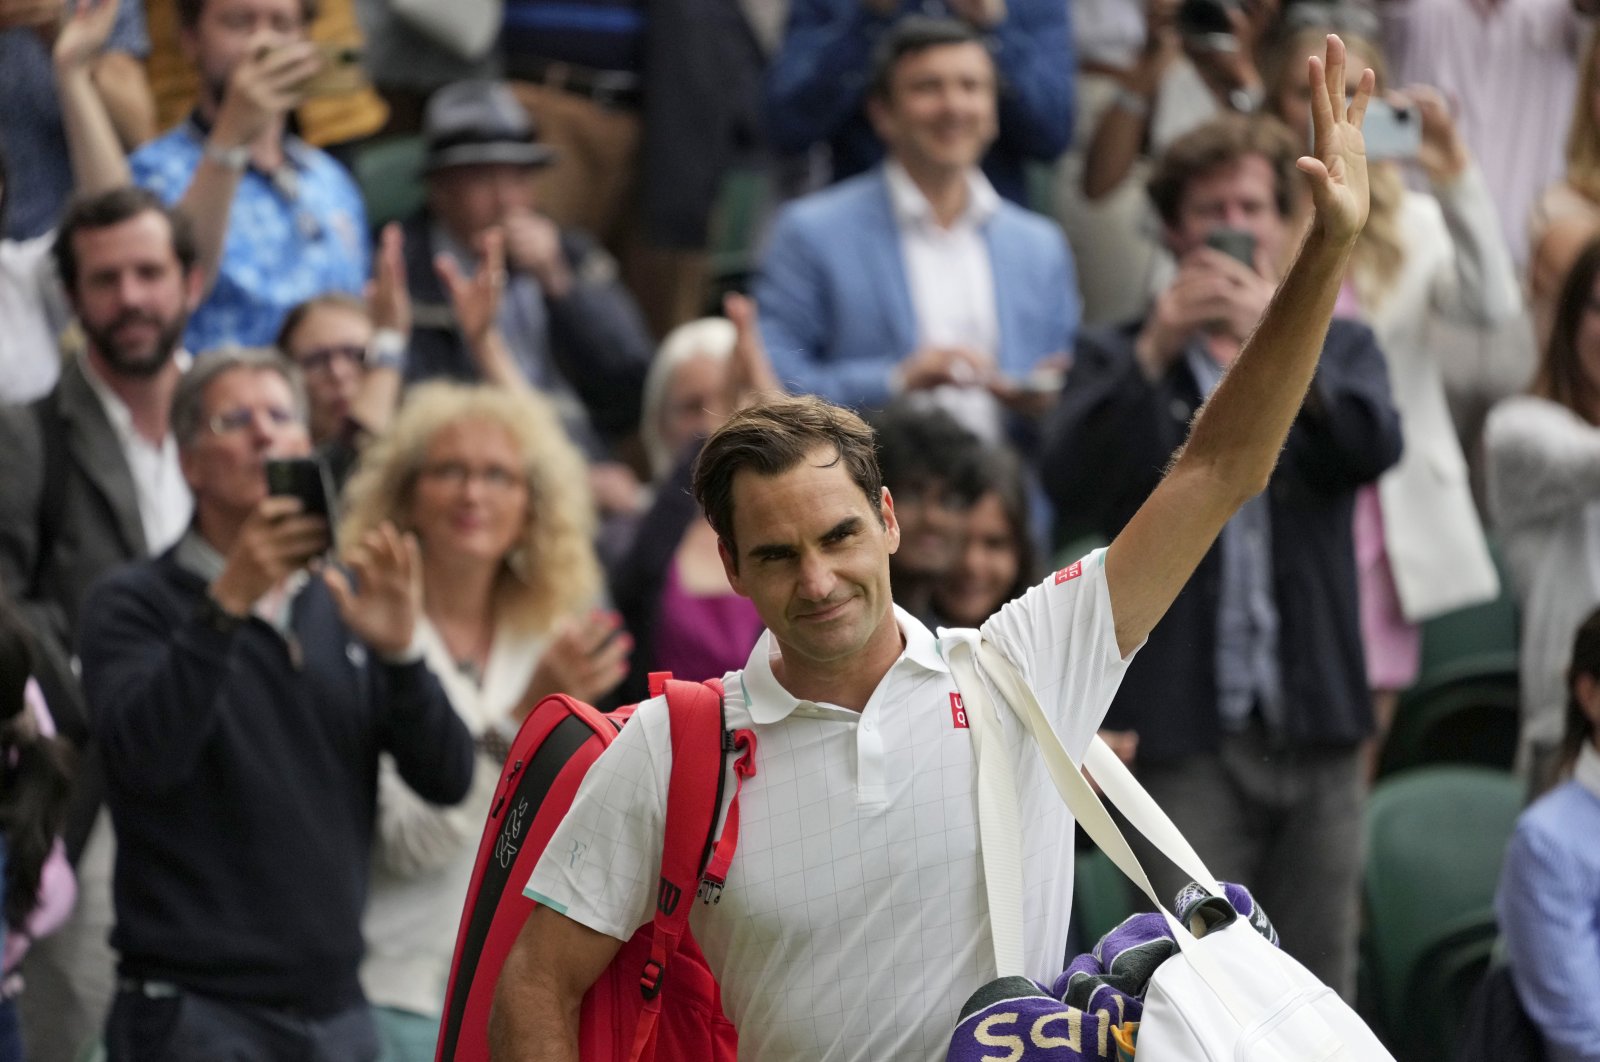 Roger Federer leaves the court after a match in London, England, July 7, 2021. (AP PHOTO)